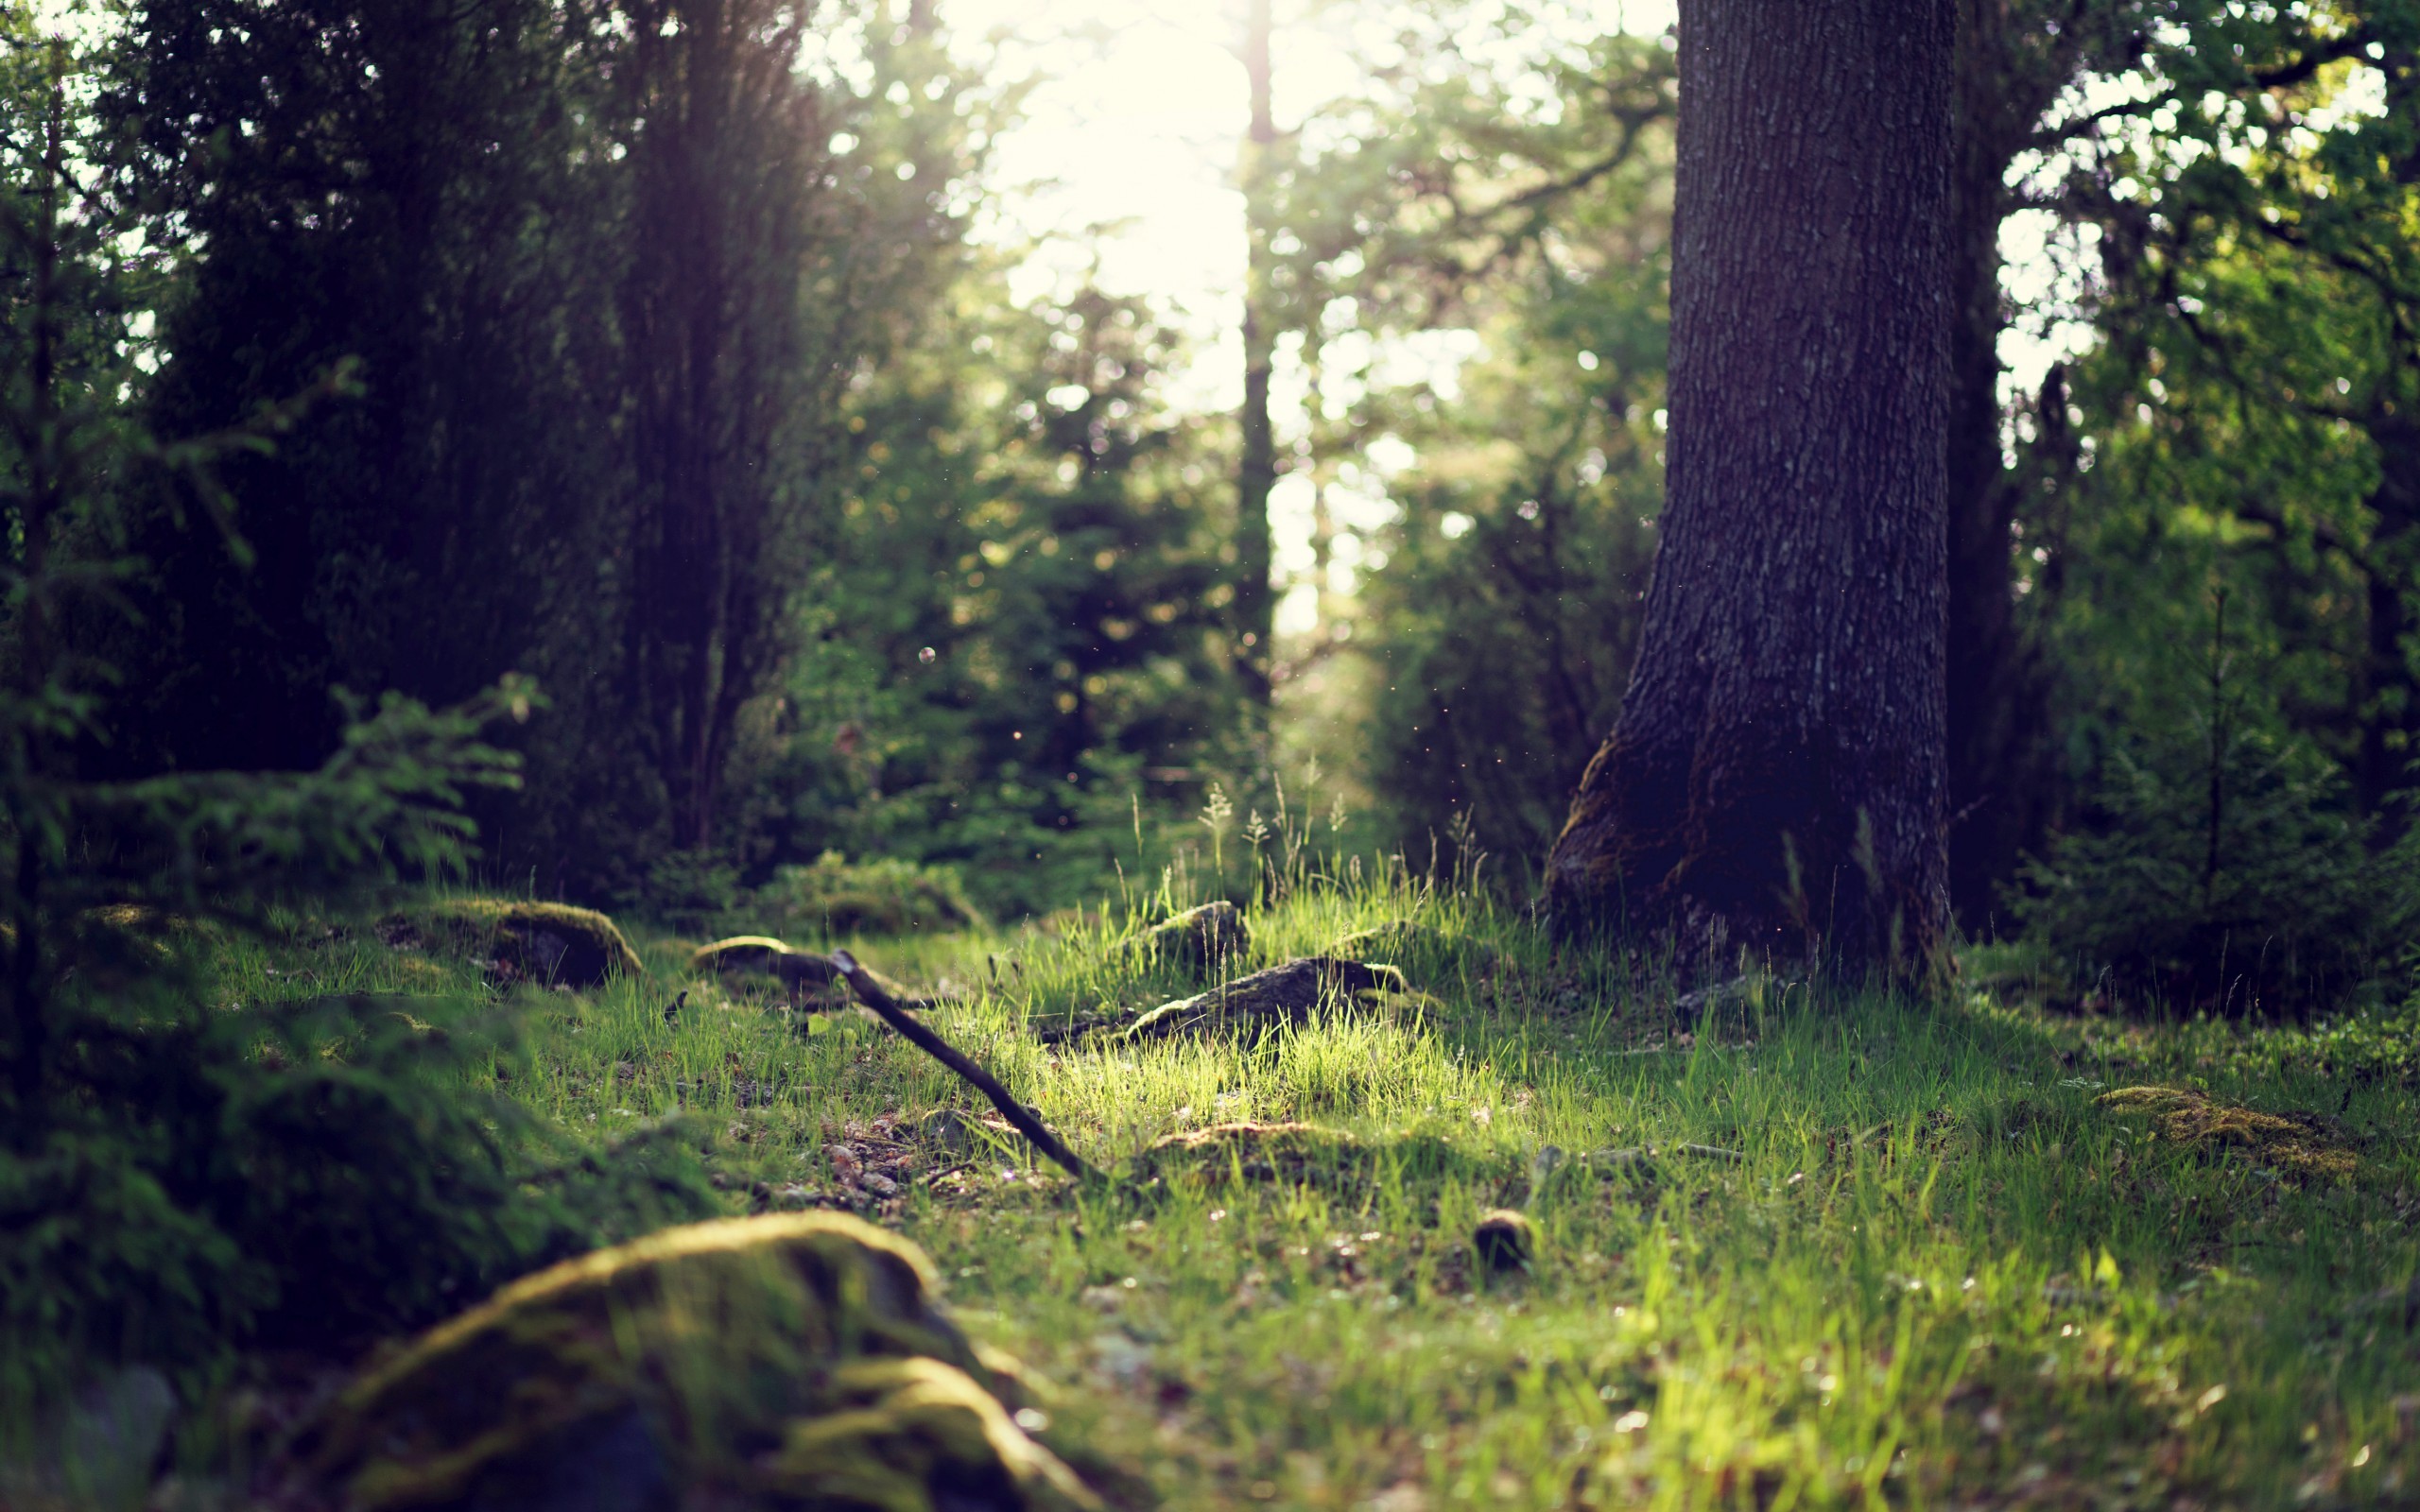 General 2560x1600 forest nature forest clearing sunlight grass plants